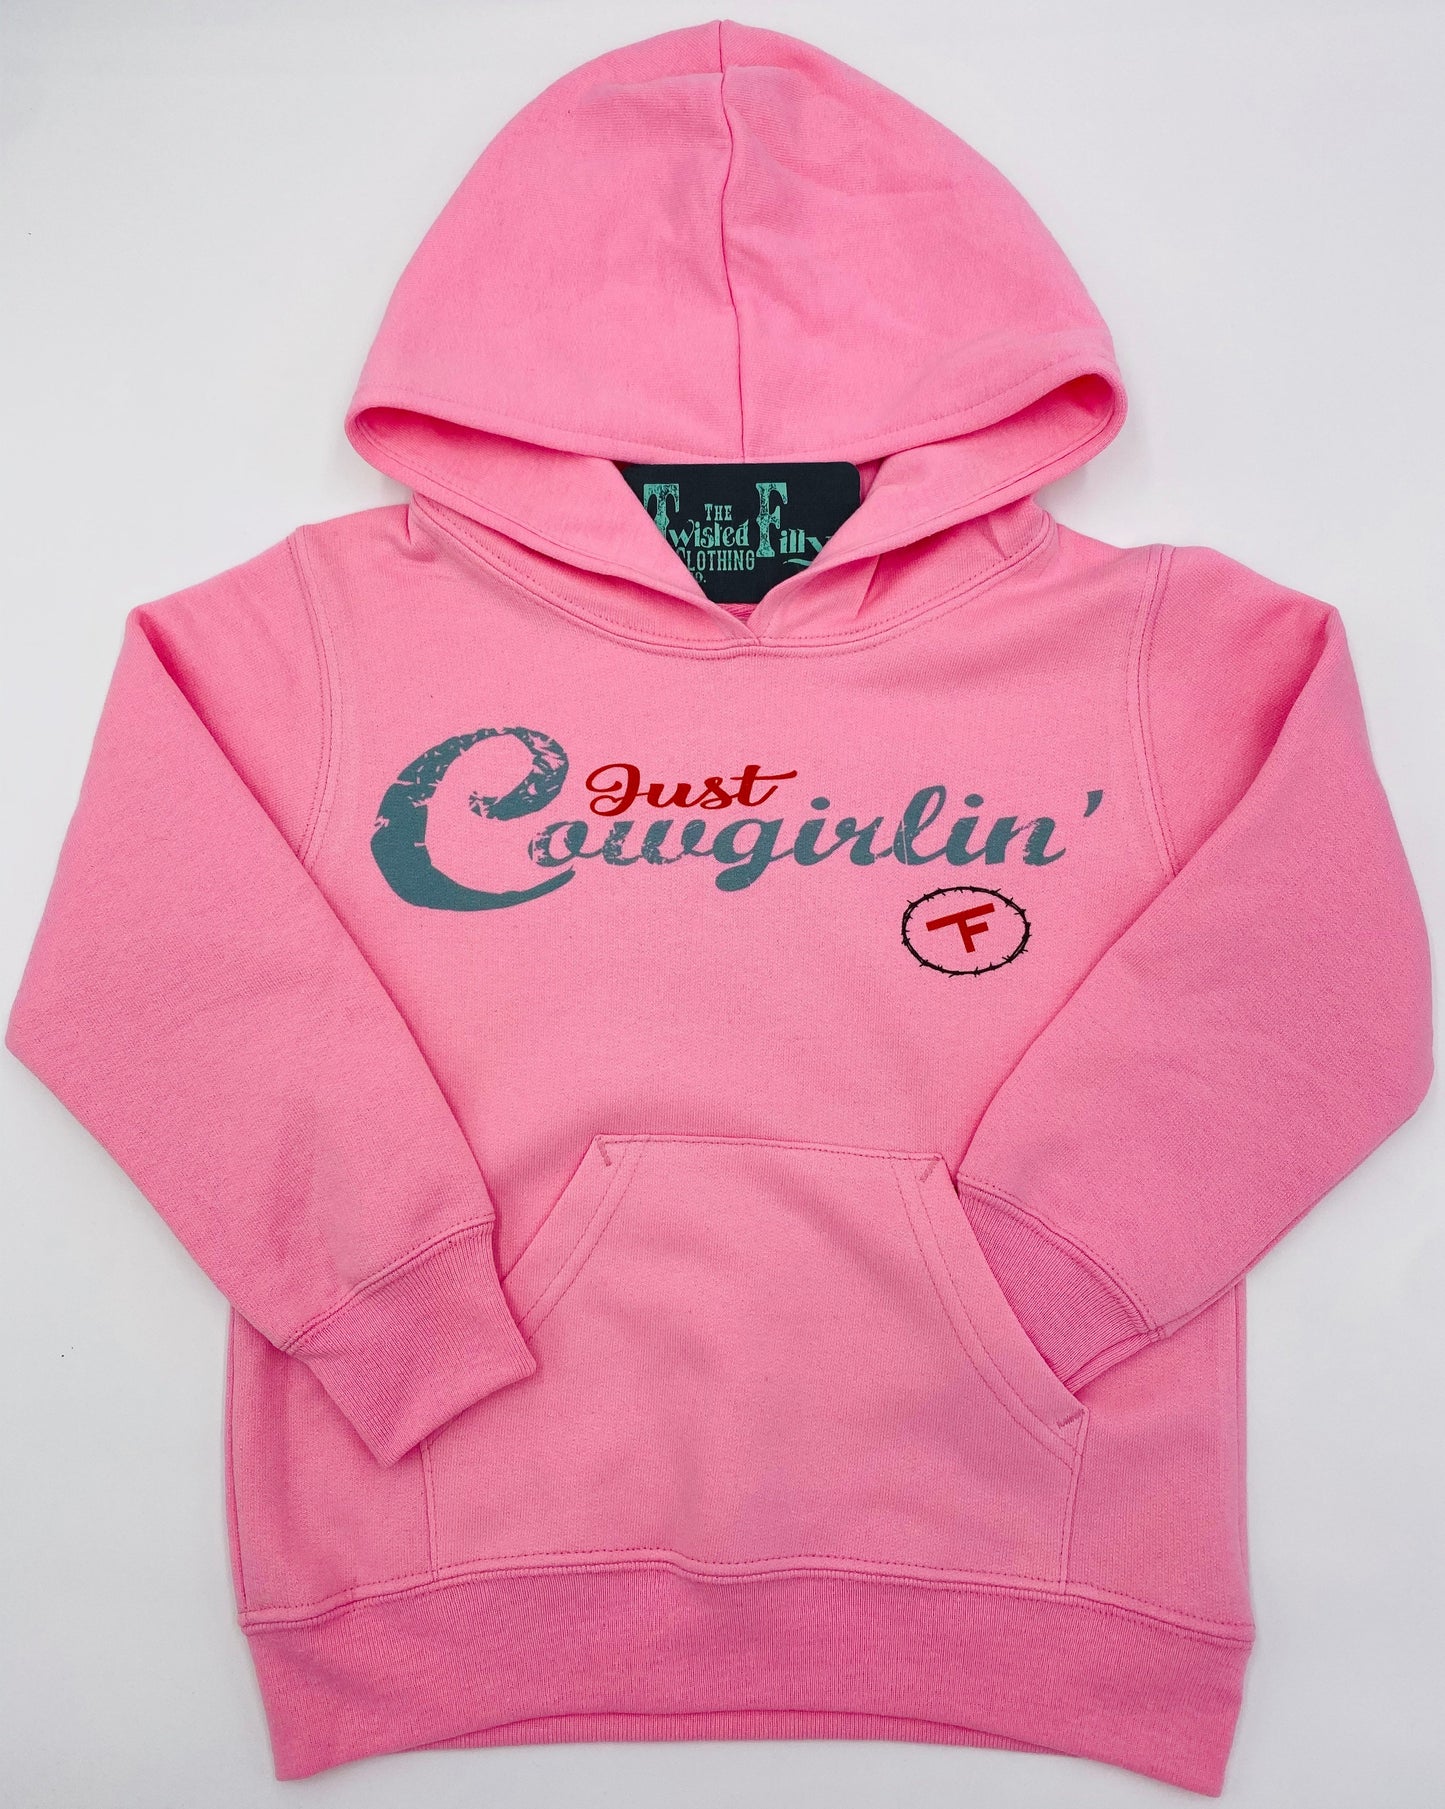 Just Cowgirlin' - Youth Hoodie - Pink